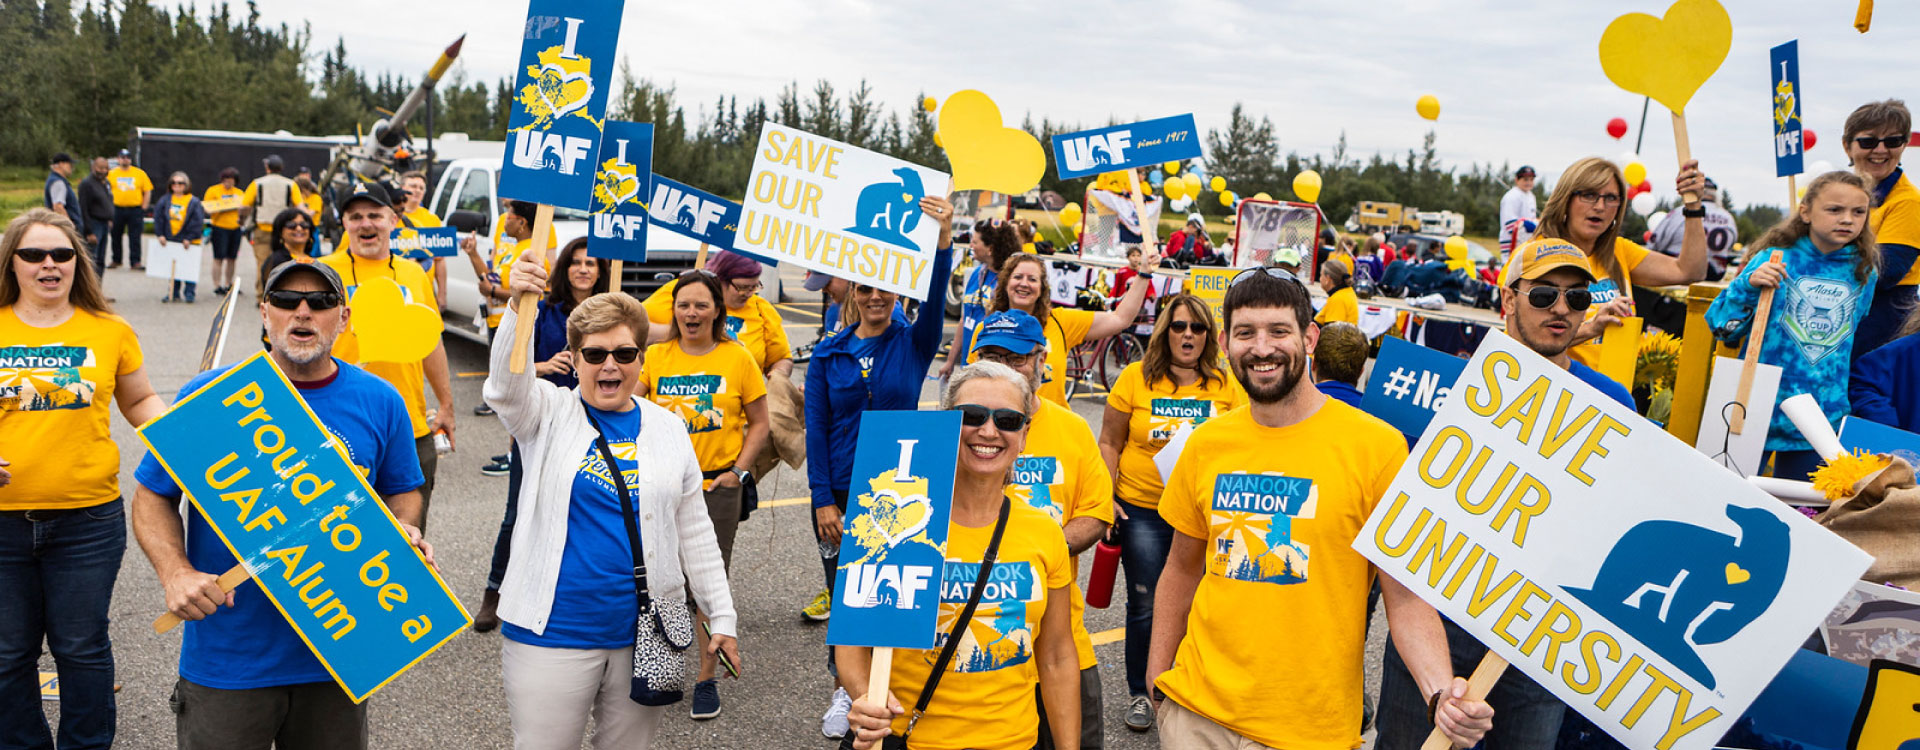 UAF Alumni and supporters at the annual Fairbanks Golden Days Parade